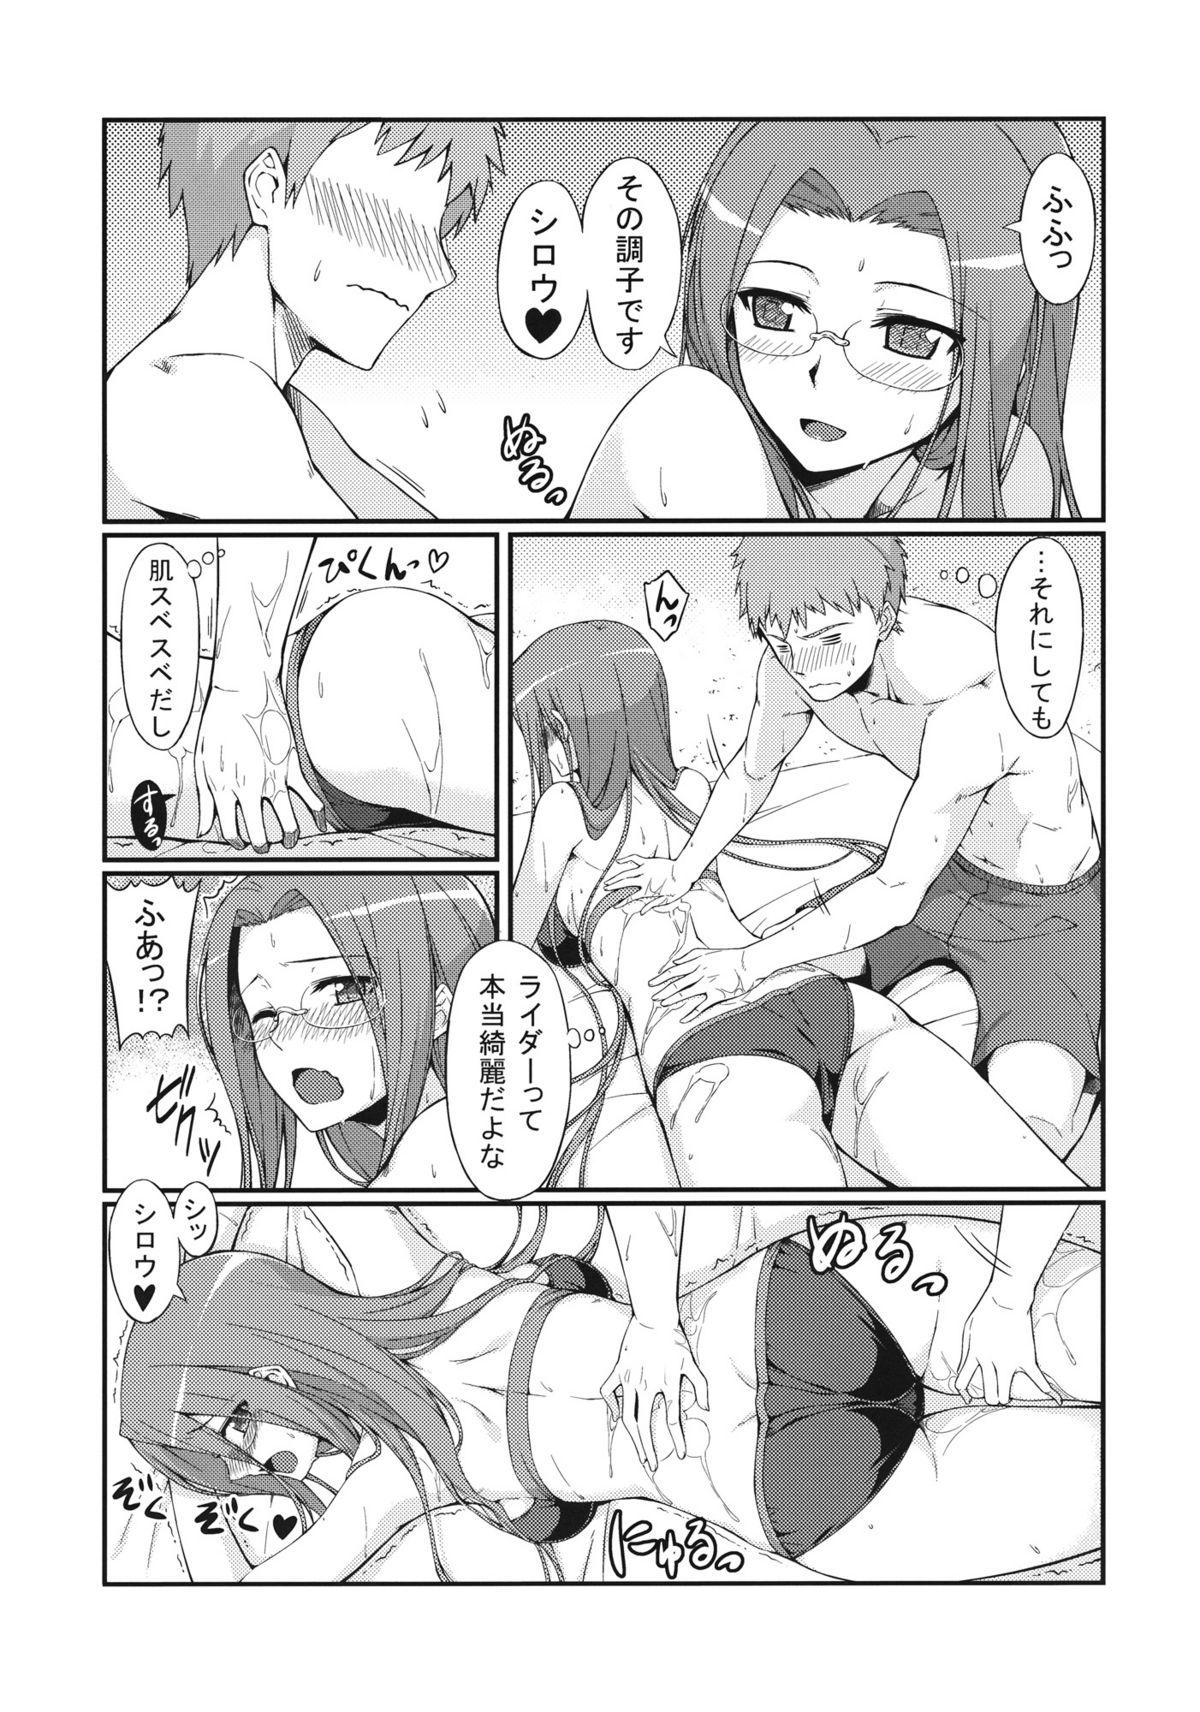 Gets Rider-san to Kaisuiyoku. - Fate stay night Fate hollow ataraxia Pigtails - Page 9